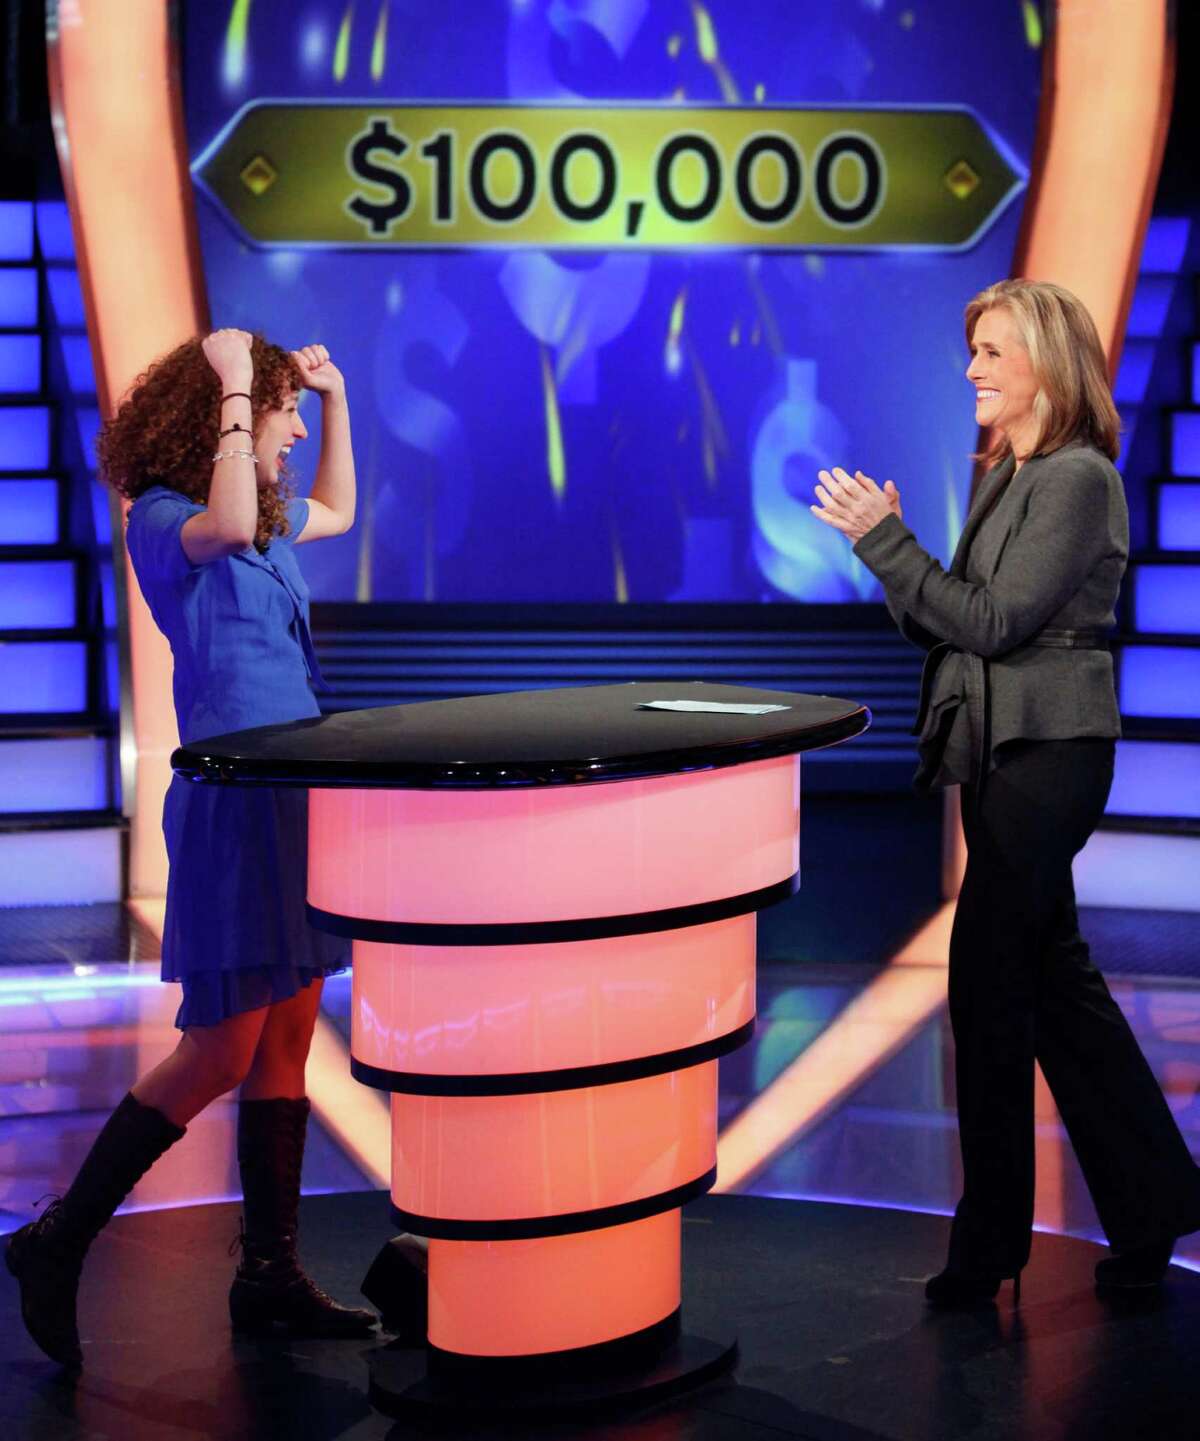 Meredith Viera is the host of "Who Wants To Be A Millionaire?" The show will hold auditions in Houston on July 23, 2012.